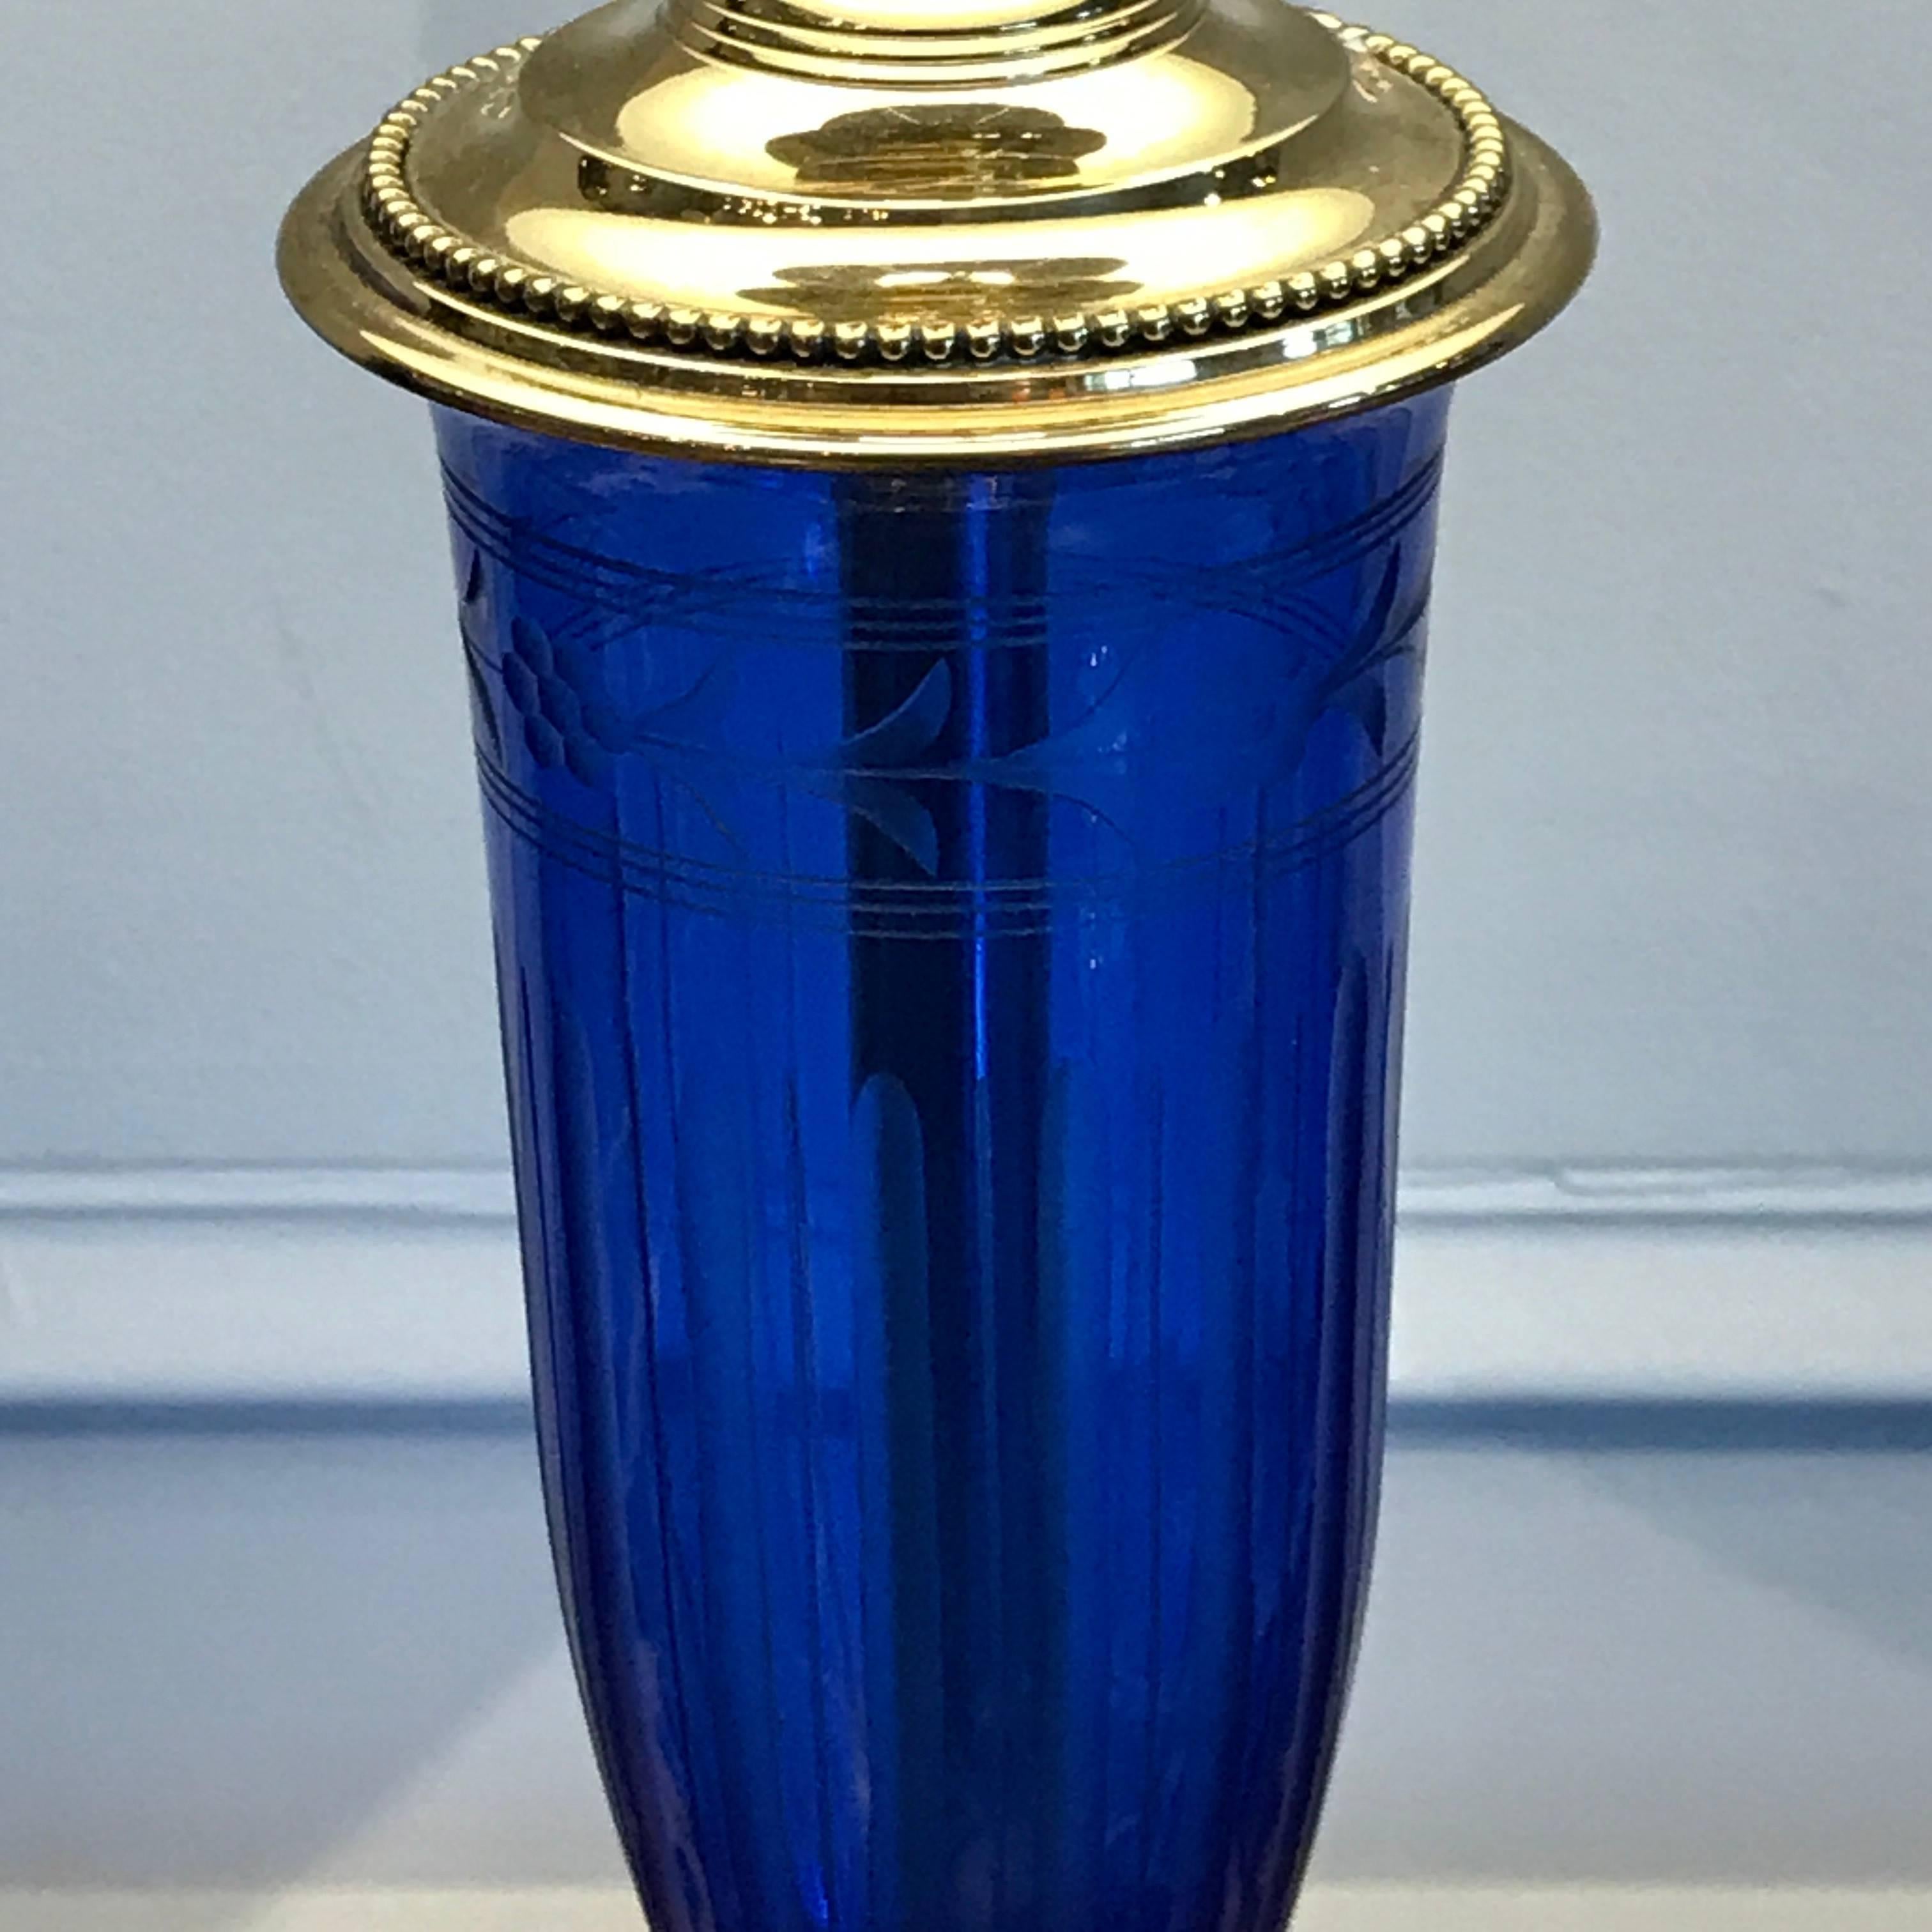 Pair of Cobalt Blue and Brass-Mounted Urn Lamps by Pairpoint 1